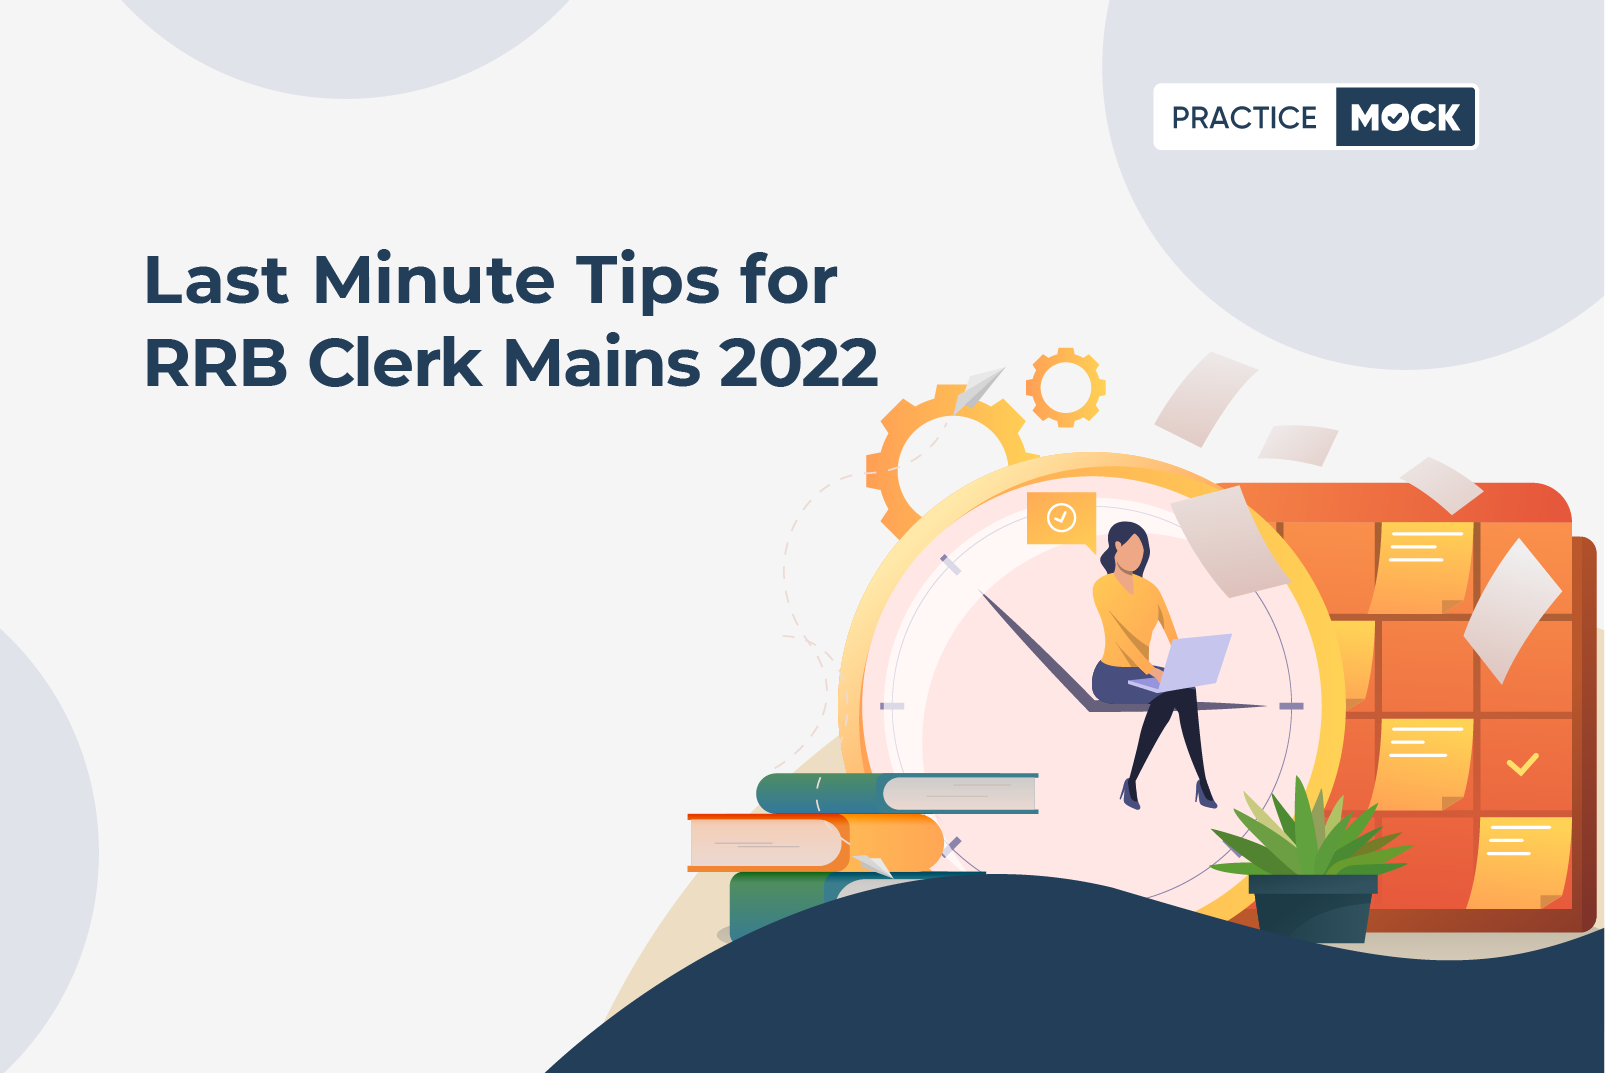 Last minute tips for RRB Clerk Mains 2022